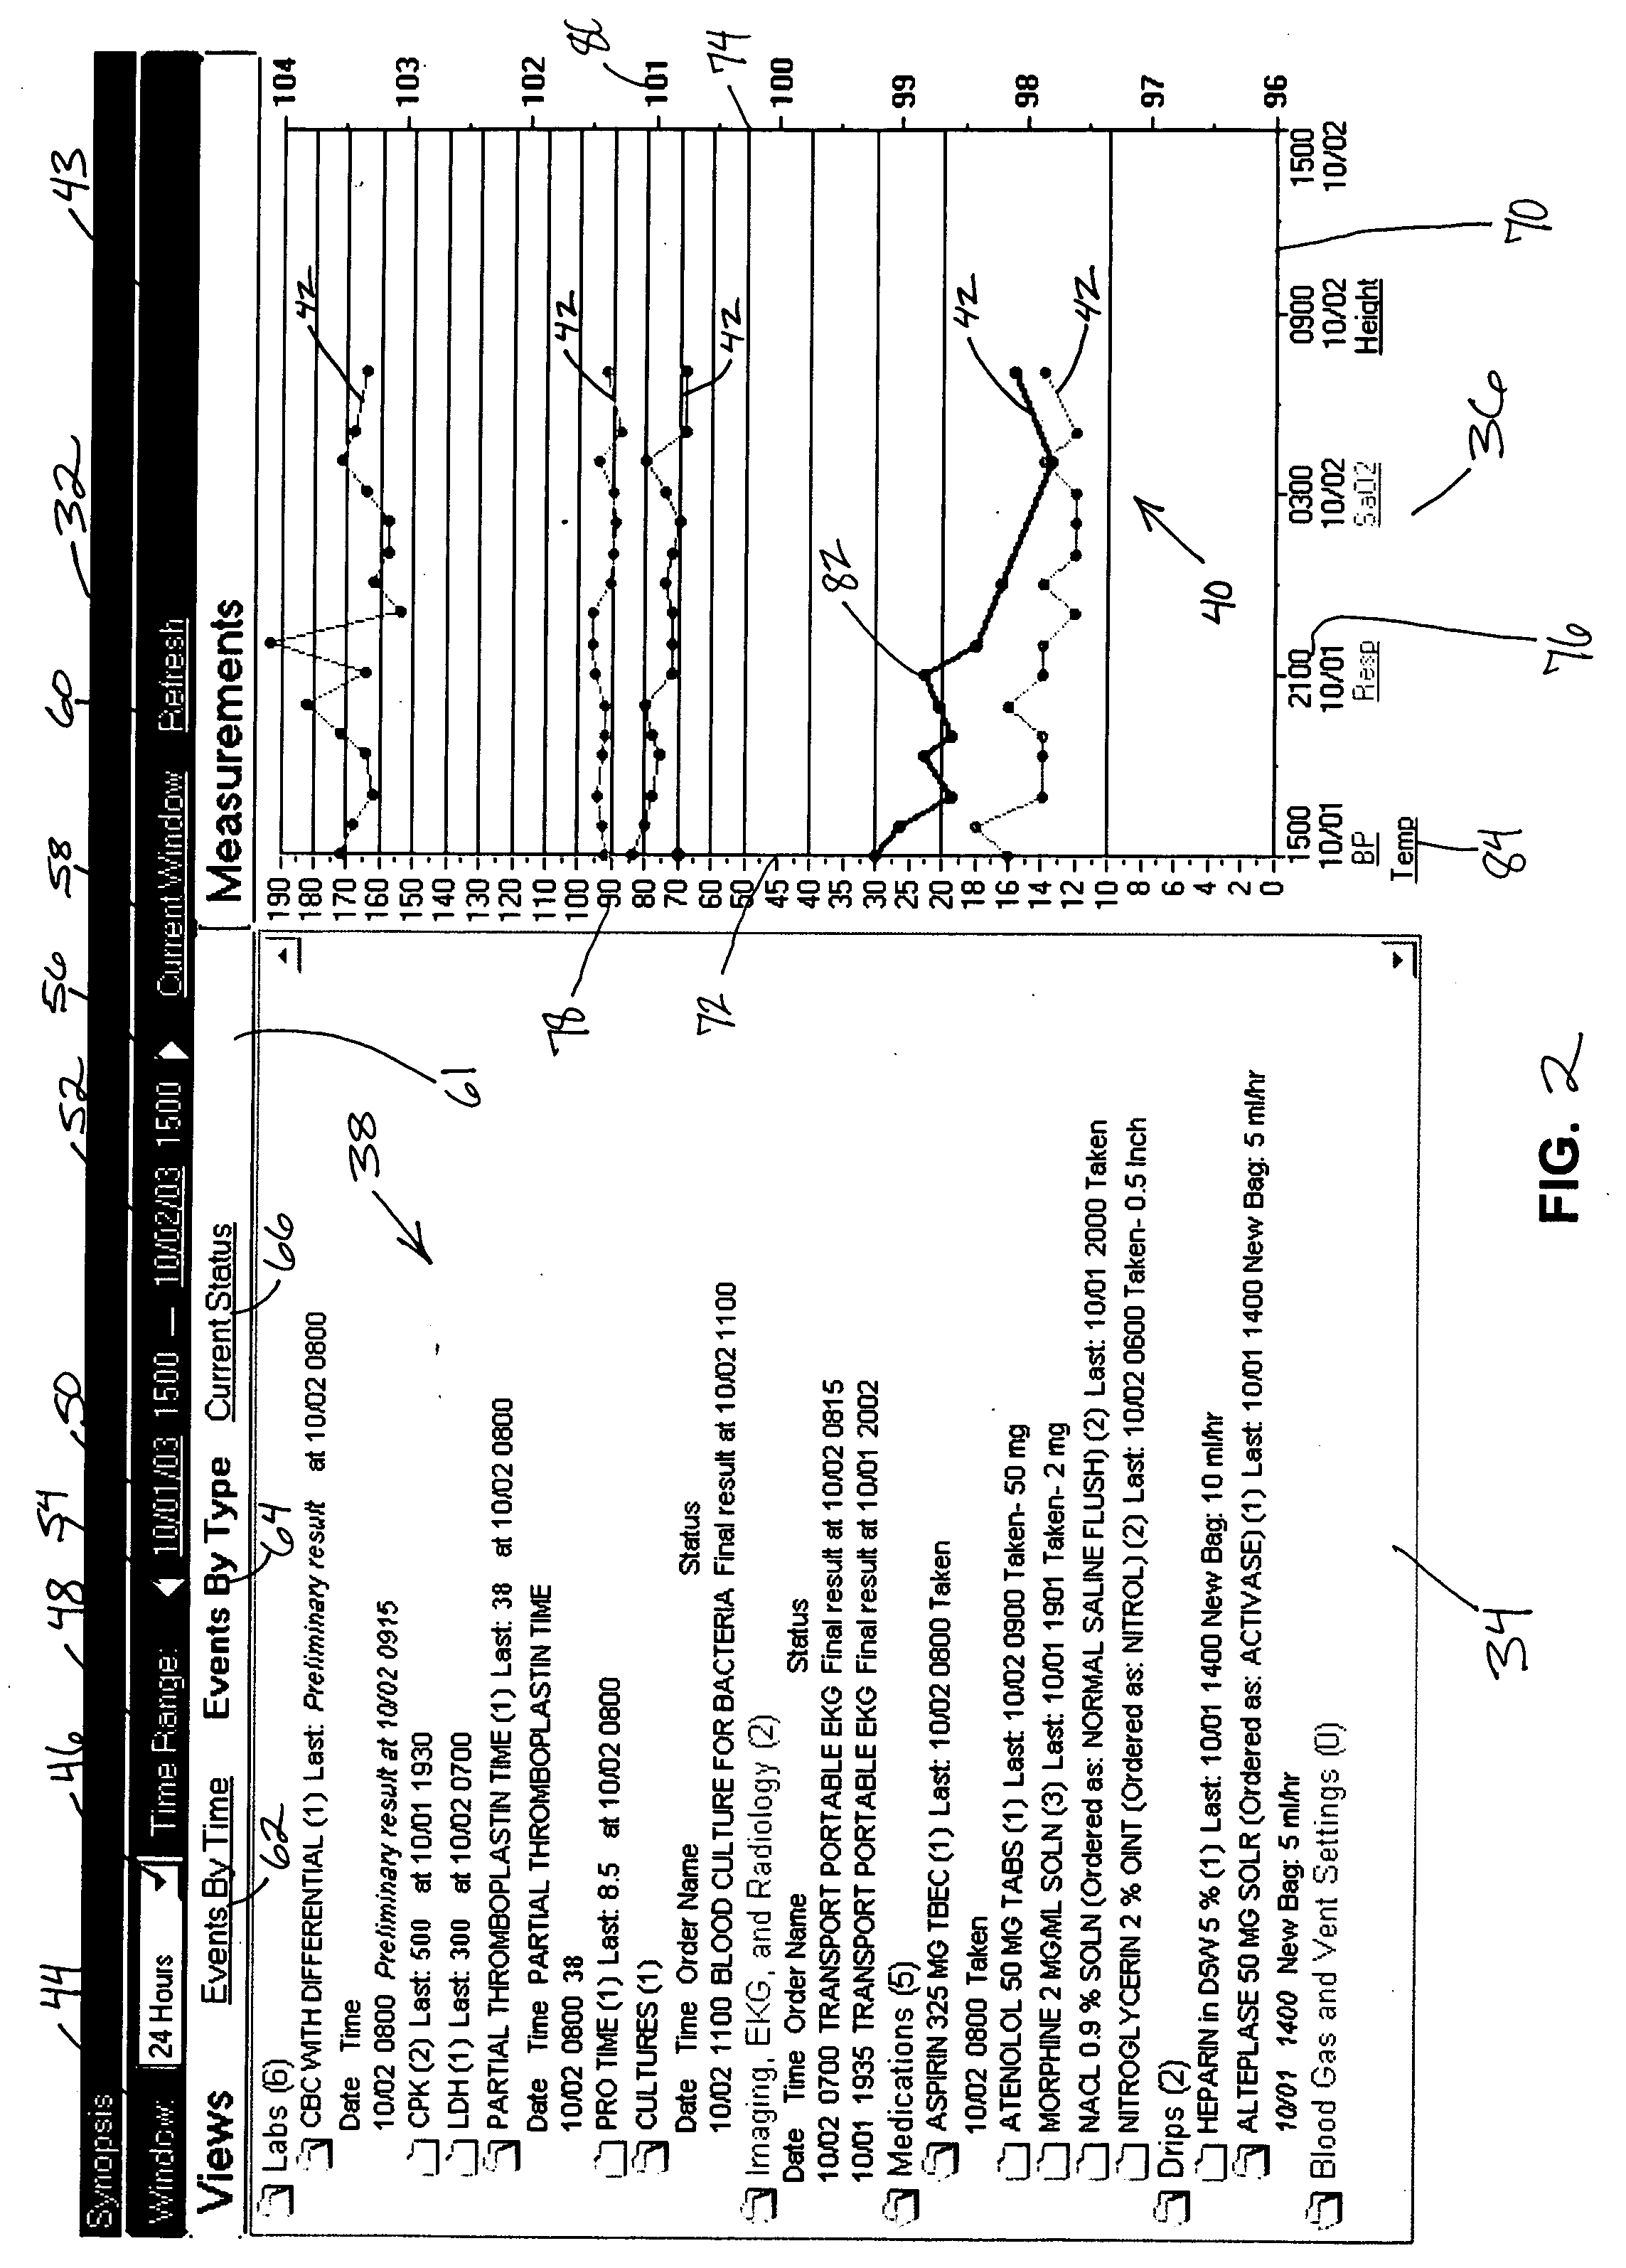 System and method for providing a clinical summary of patient information in various health care settings